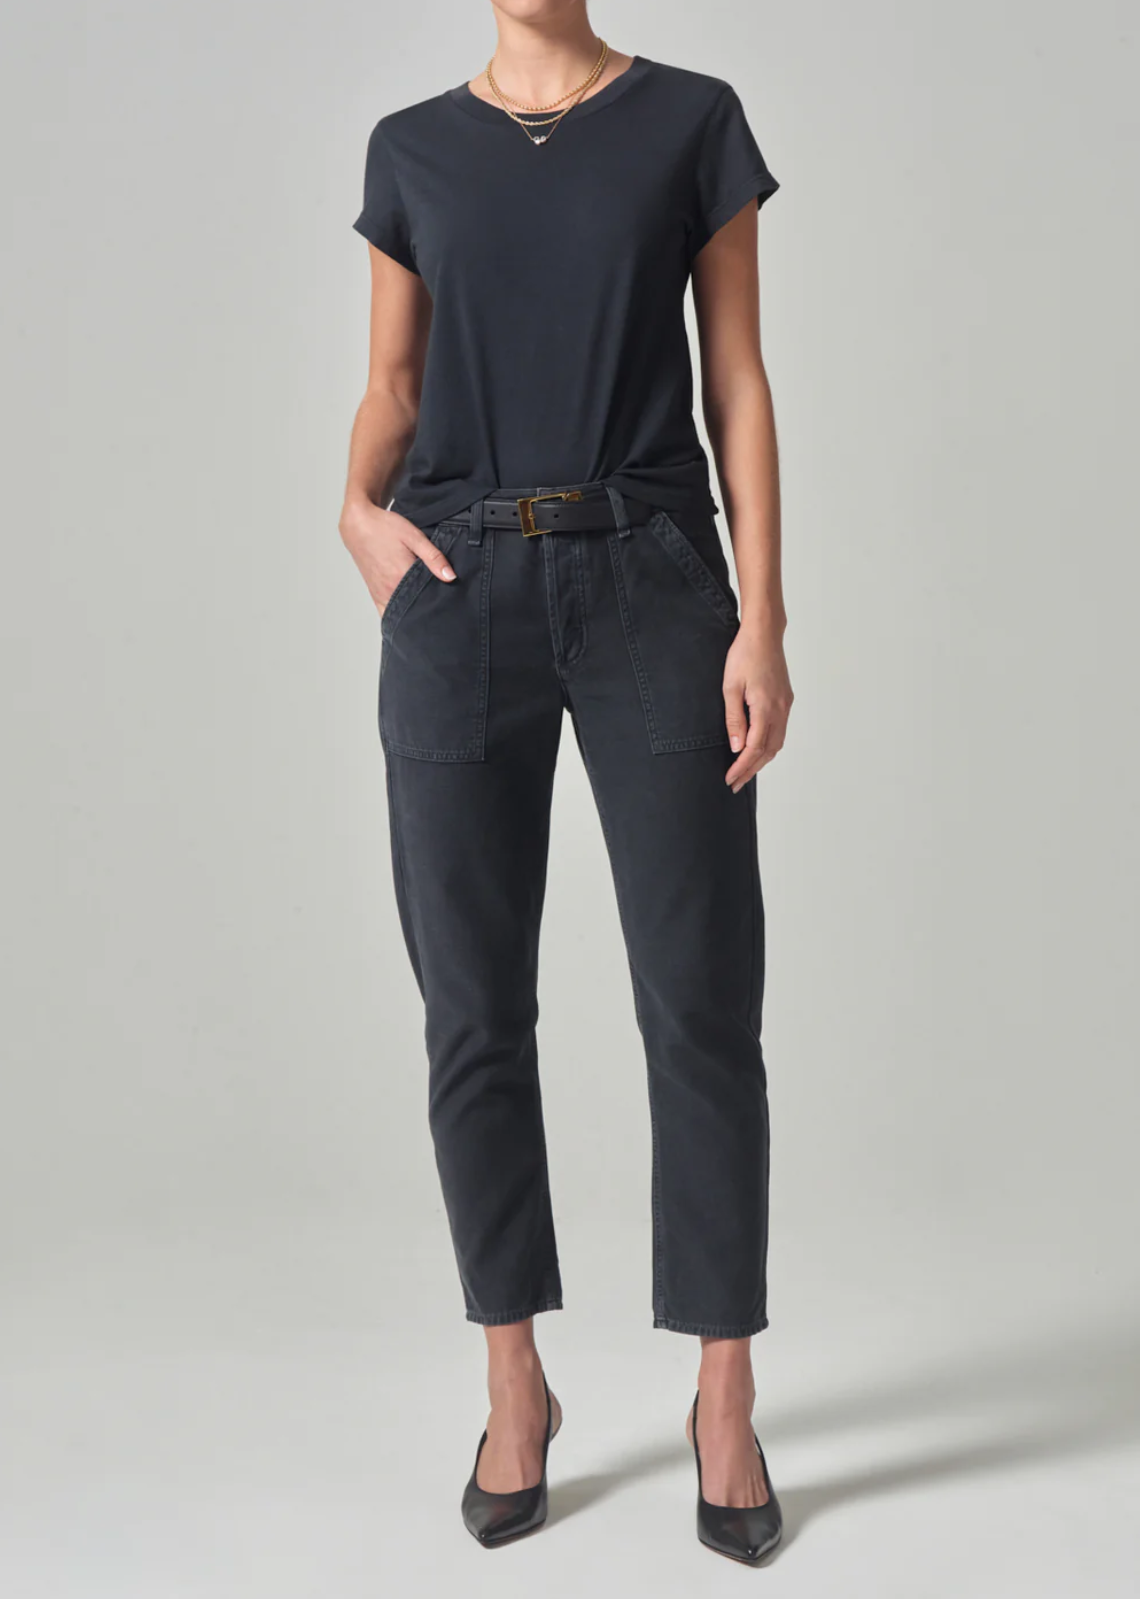 Leah Straight Ankle Pant